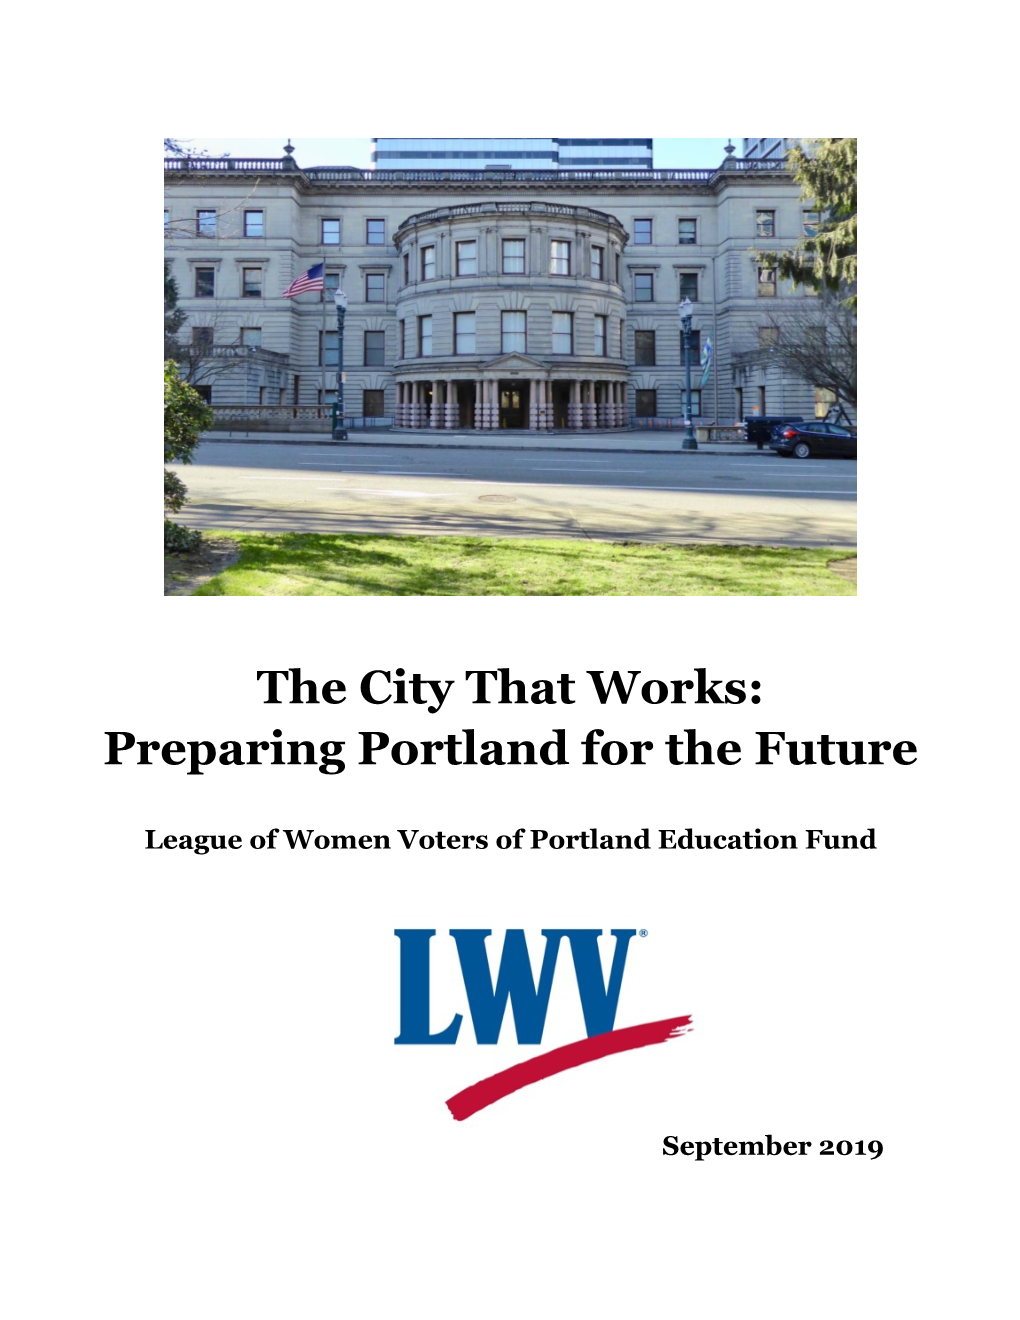 The City That Works: Preparing Portland for the Future